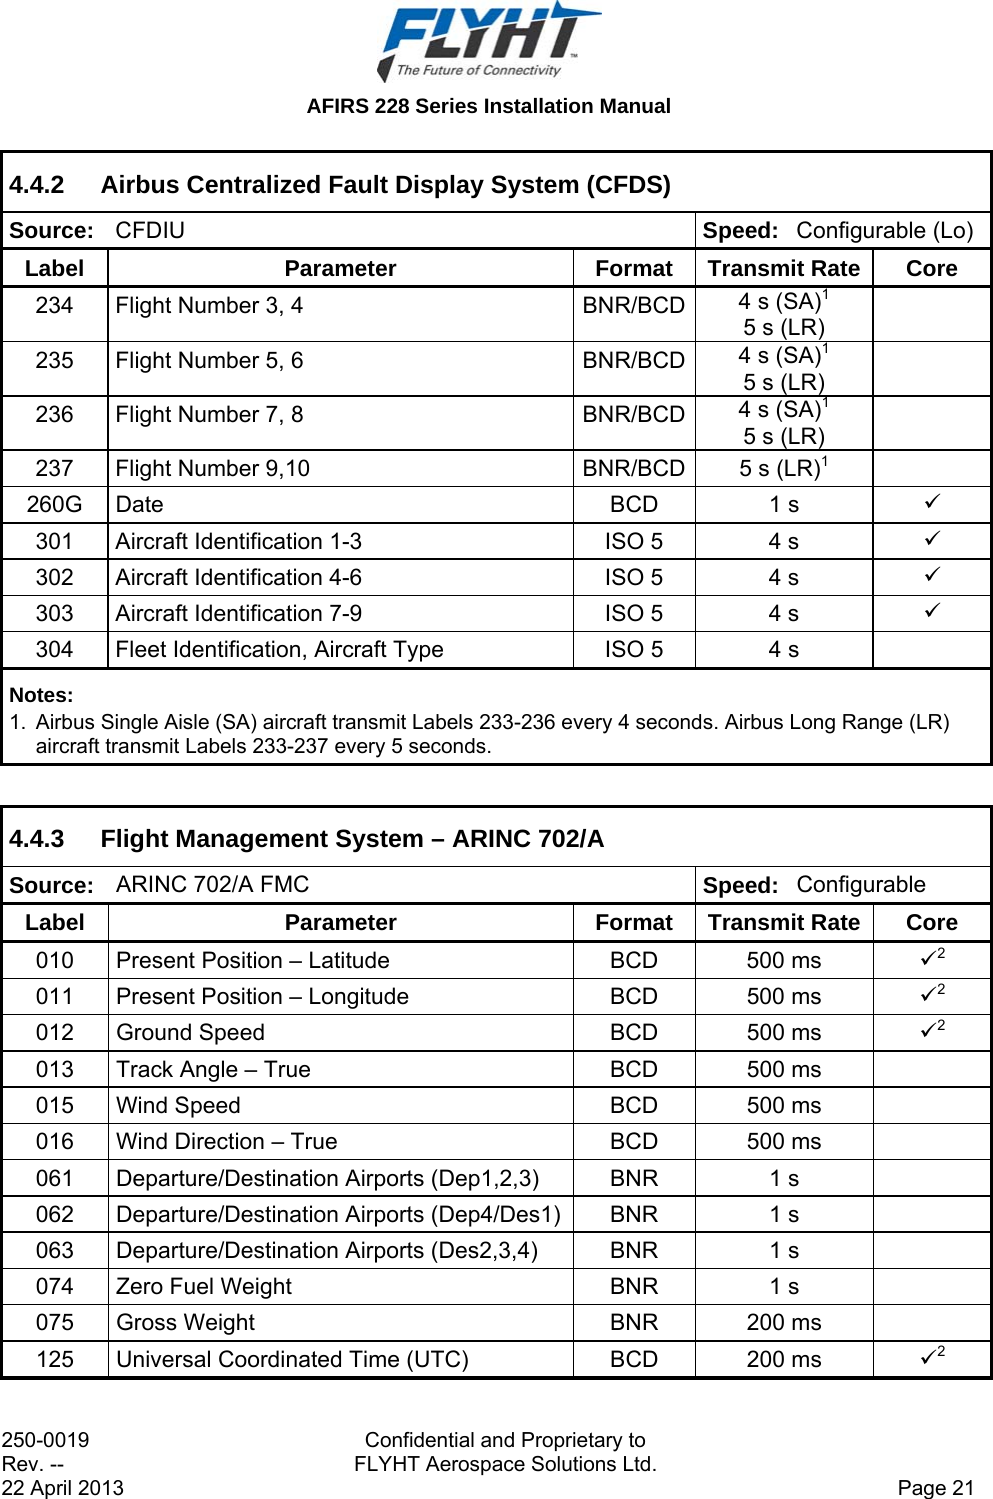  AFIRS 228 Series Installation Manual 250-0019  Confidential and Proprietary to Rev. --  FLYHT Aerospace Solutions Ltd. 22 April 2013    Page 21 4.4.2  Airbus Centralized Fault Display System (CFDS) Source:  CFDIU  Speed:  Configurable (Lo) Label Parameter Format Transmit Rate Core 234  Flight Number 3, 4  BNR/BCD 4 s (SA)1 5 s (LR)  235  Flight Number 5, 6  BNR/BCD 4 s (SA)1 5 s (LR)  236  Flight Number 7, 8  BNR/BCD 4 s (SA)1 5 s (LR)  237  Flight Number 9,10  BNR/BCD 5 s (LR)1  260G Date  BCD  1 s   301  Aircraft Identification 1-3  ISO 5  4 s   302  Aircraft Identification 4-6  ISO 5  4 s   303  Aircraft Identification 7-9  ISO 5  4 s   304  Fleet Identification, Aircraft Type  ISO 5  4 s   Notes: 1.  Airbus Single Aisle (SA) aircraft transmit Labels 233-236 every 4 seconds. Airbus Long Range (LR) aircraft transmit Labels 233-237 every 5 seconds.  4.4.3 Flight Management System – ARINC 702/A Source:  ARINC 702/A FMC  Speed:  Configurable Label Parameter Format Transmit Rate Core 010  Present Position – Latitude  BCD  500 ms  2 011  Present Position – Longitude  BCD  500 ms  2 012  Ground Speed  BCD  500 ms  2 013  Track Angle – True  BCD  500 ms   015  Wind Speed  BCD  500 ms   016  Wind Direction – True  BCD  500 ms   061  Departure/Destination Airports (Dep1,2,3)  BNR  1 s   062  Departure/Destination Airports (Dep4/Des1) BNR  1 s   063  Departure/Destination Airports (Des2,3,4)  BNR  1 s   074  Zero Fuel Weight  BNR  1 s   075  Gross Weight  BNR  200 ms   125  Universal Coordinated Time (UTC)  BCD  200 ms  2 